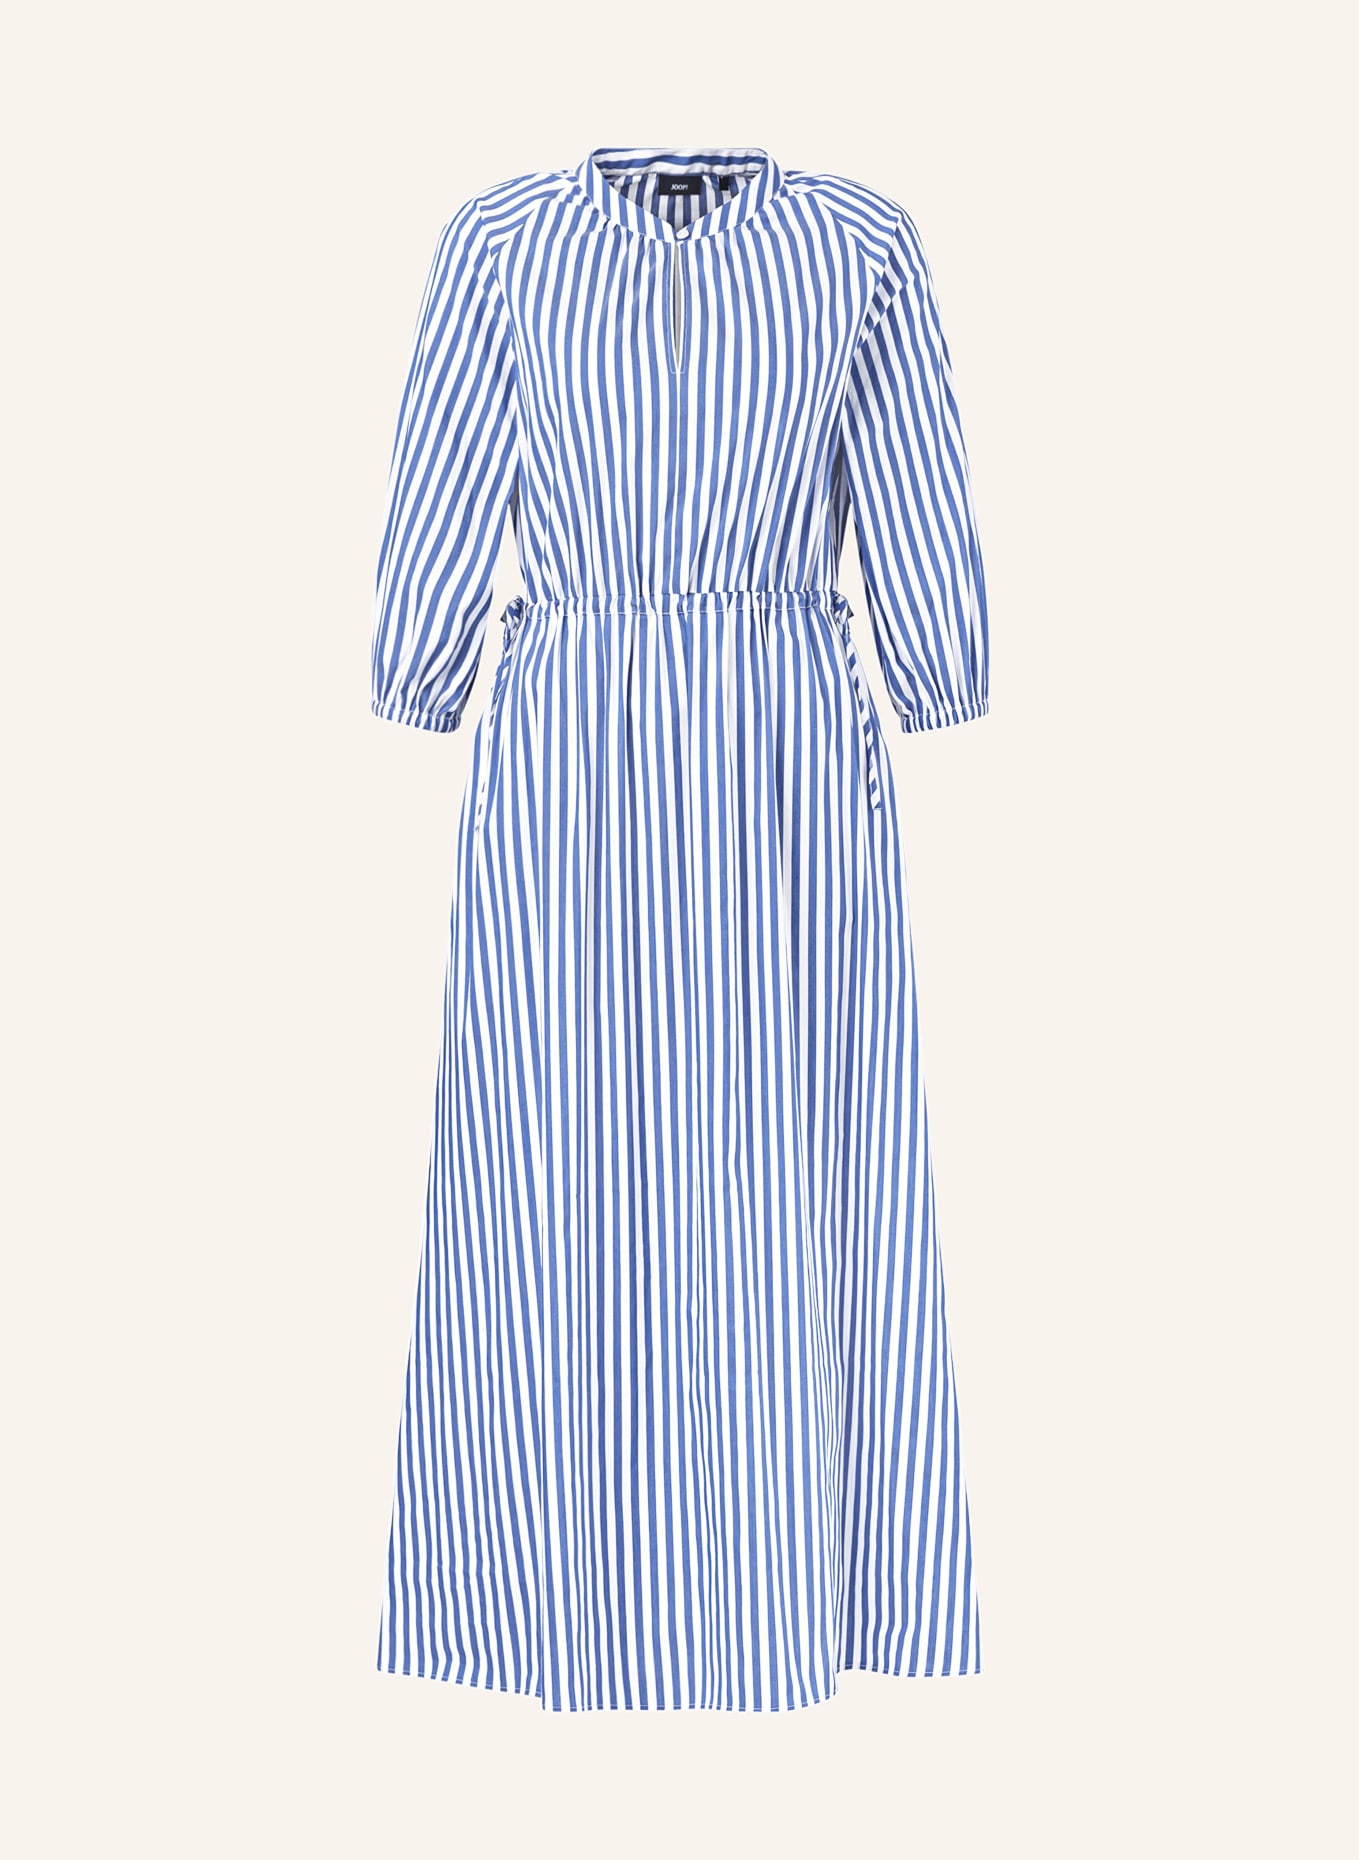 JOOP! Dress with 3/4 sleeves, Color: BLUE/ WHITE (Image 1)